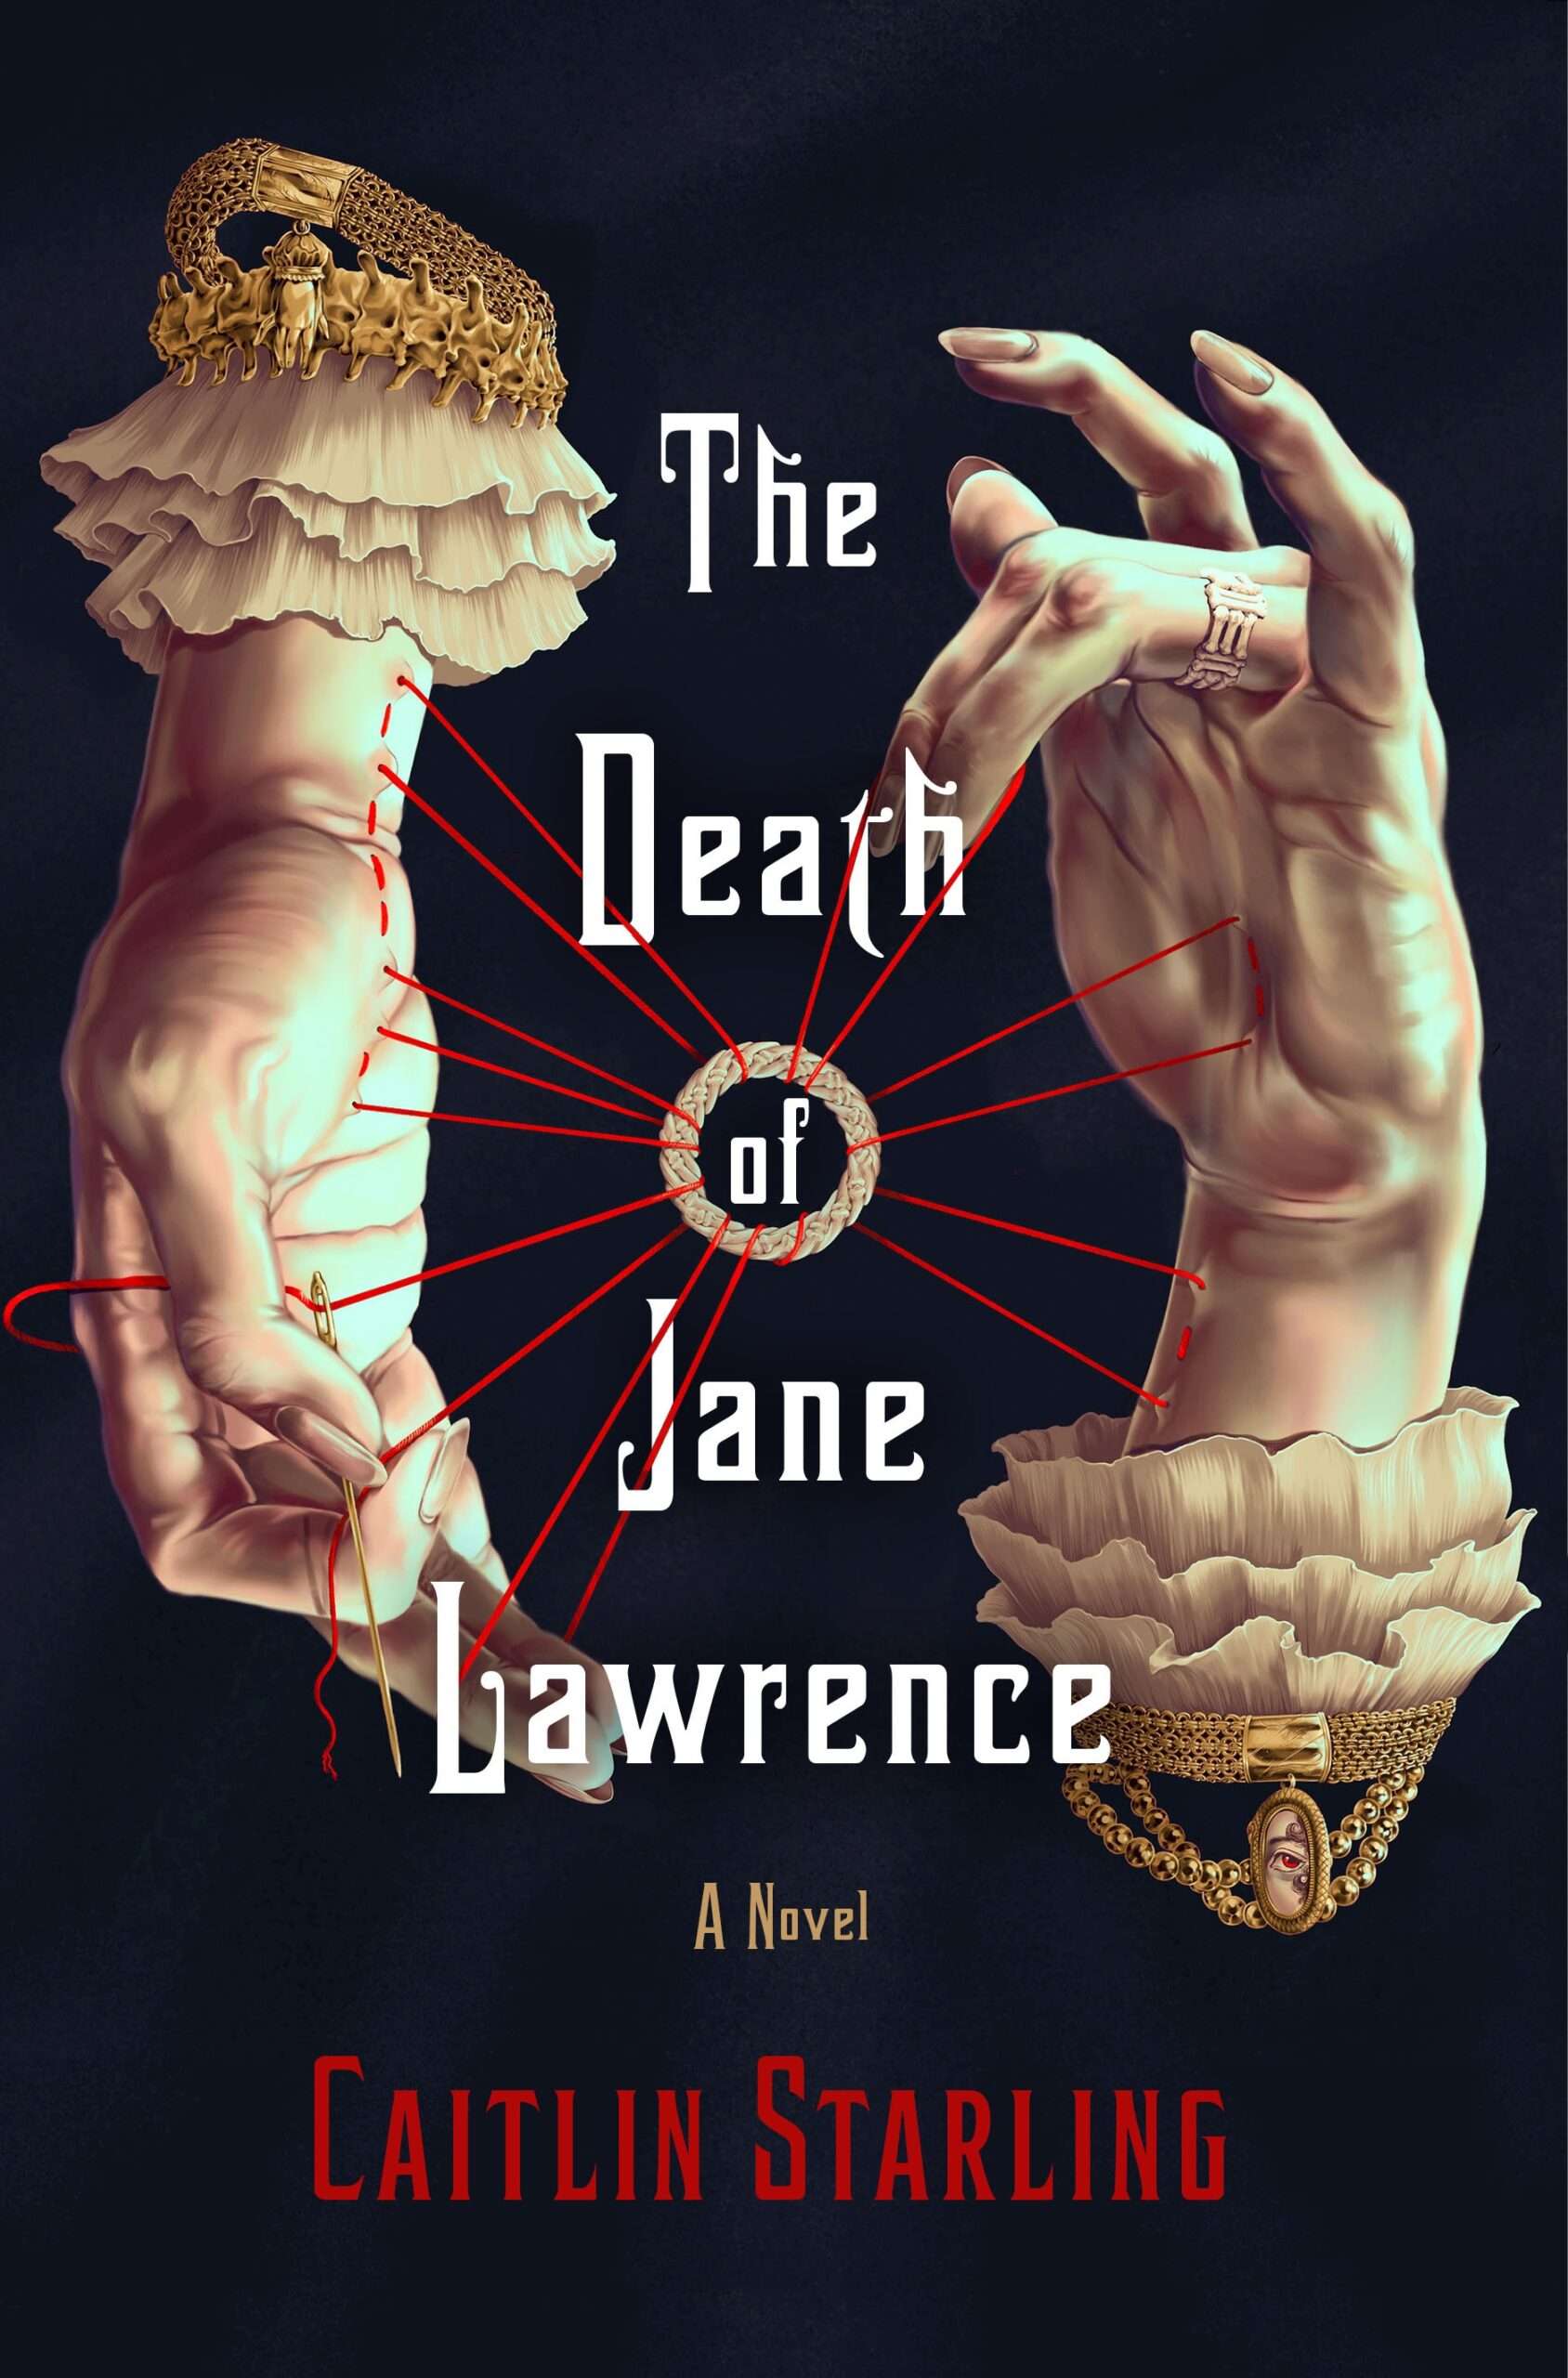 THE DEATH OF JANE LAWRENCE by Caitlin Starling from @TitanBooks